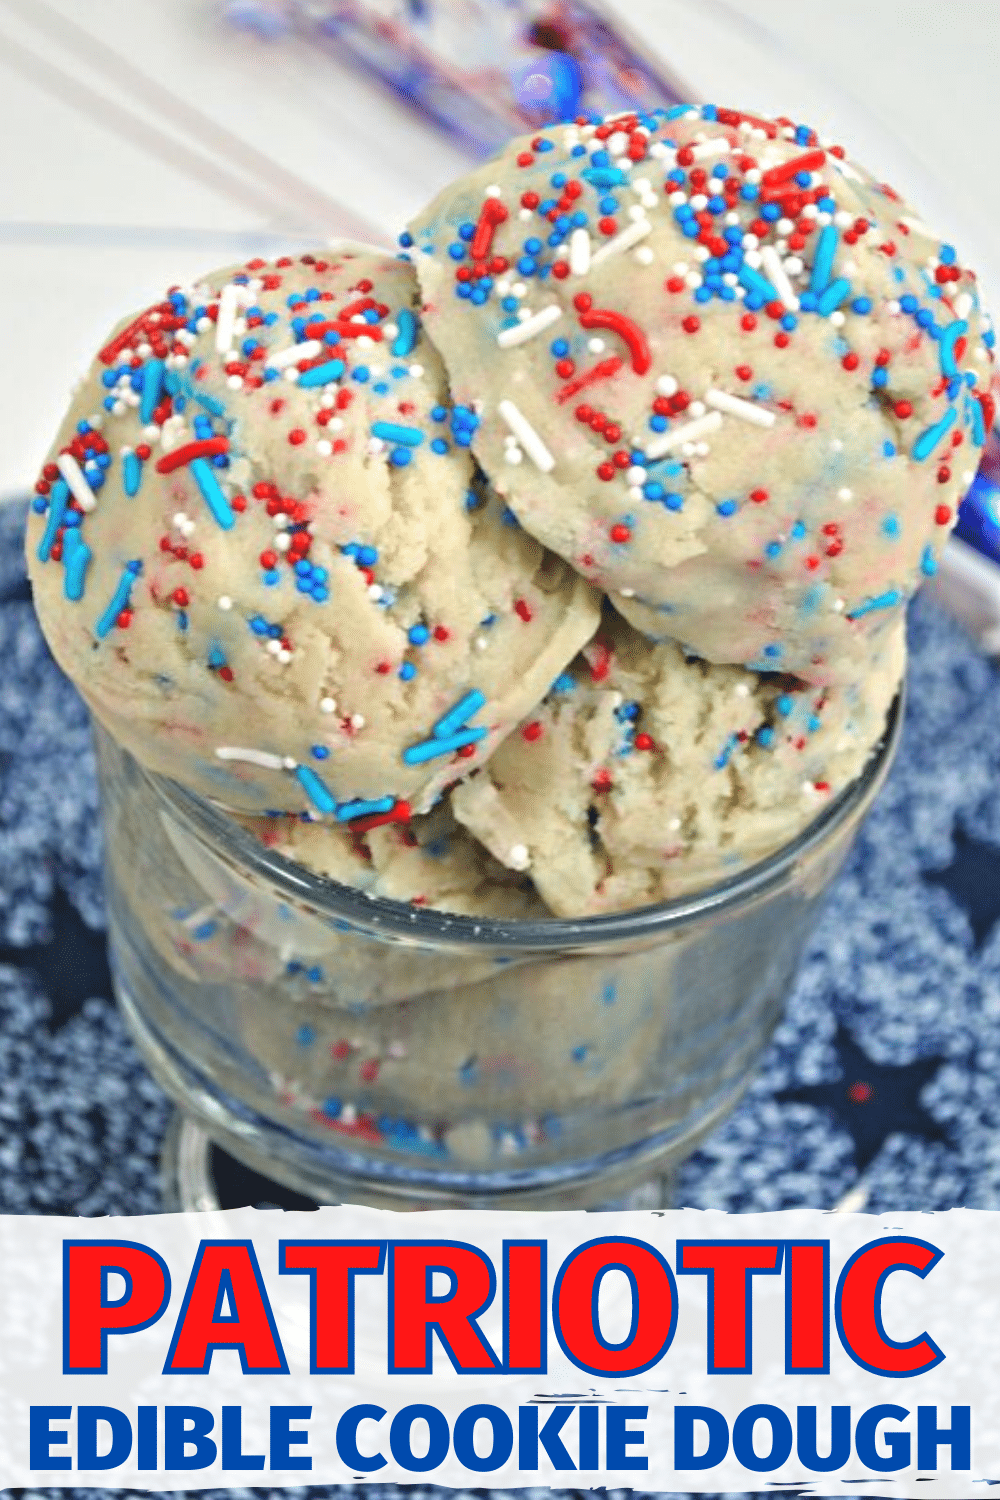 This Patriotic Edible Cookie Dough Recipe is simple to make and safe to eat! Perfect for those patriotic holidays like Memorial Day or 4th of July. #cookiedough #4thofJuly #patriotic via @wondermomwannab